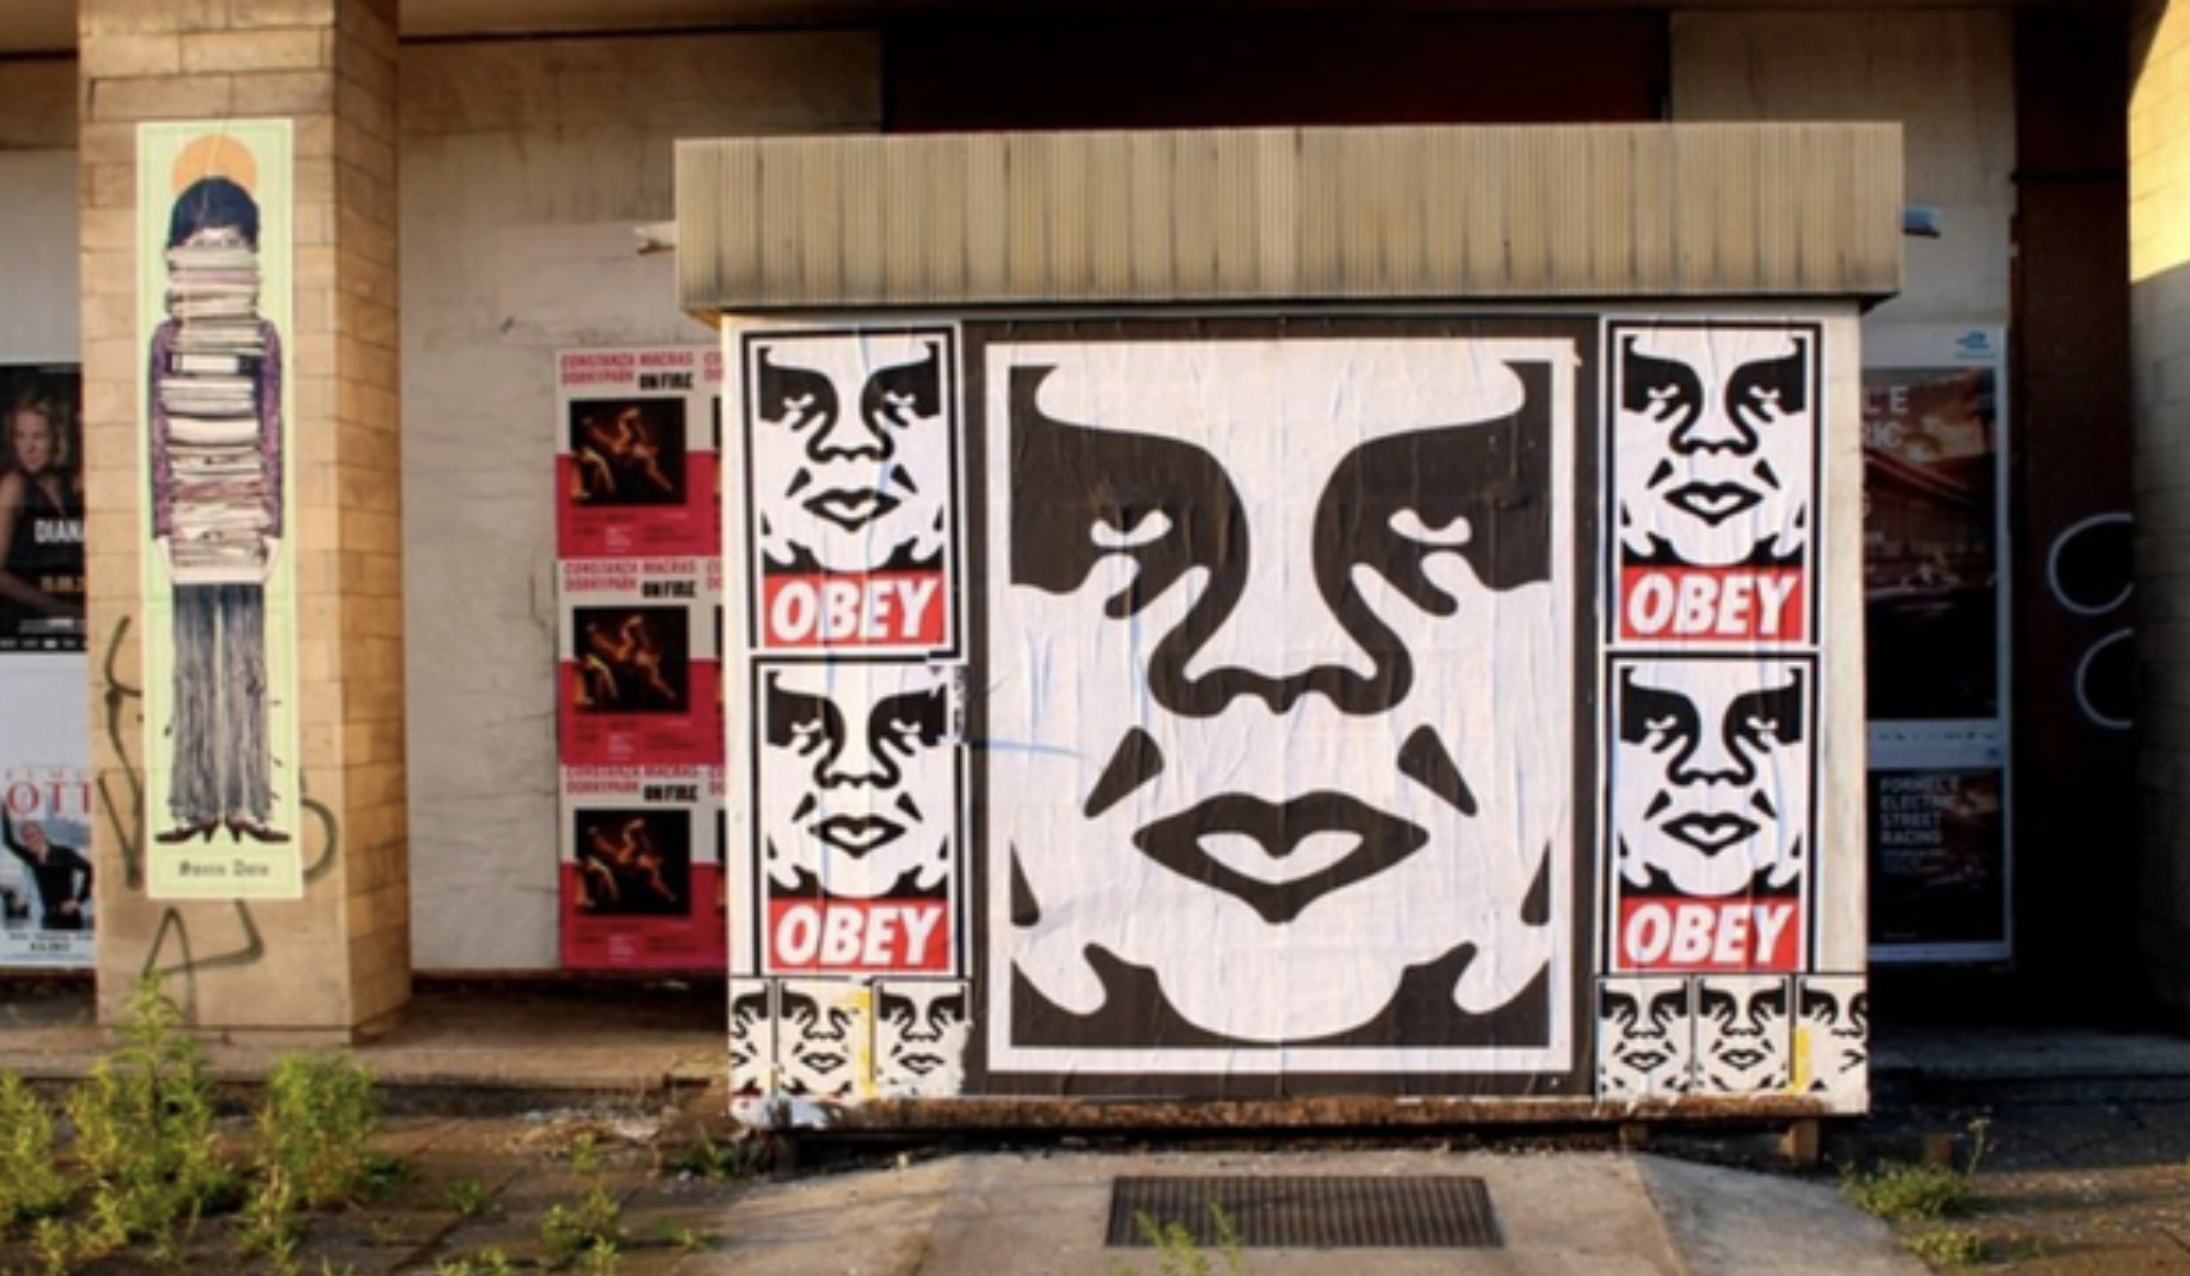 Shepard Fairey and ObeyGiant Team Launch $OBEY